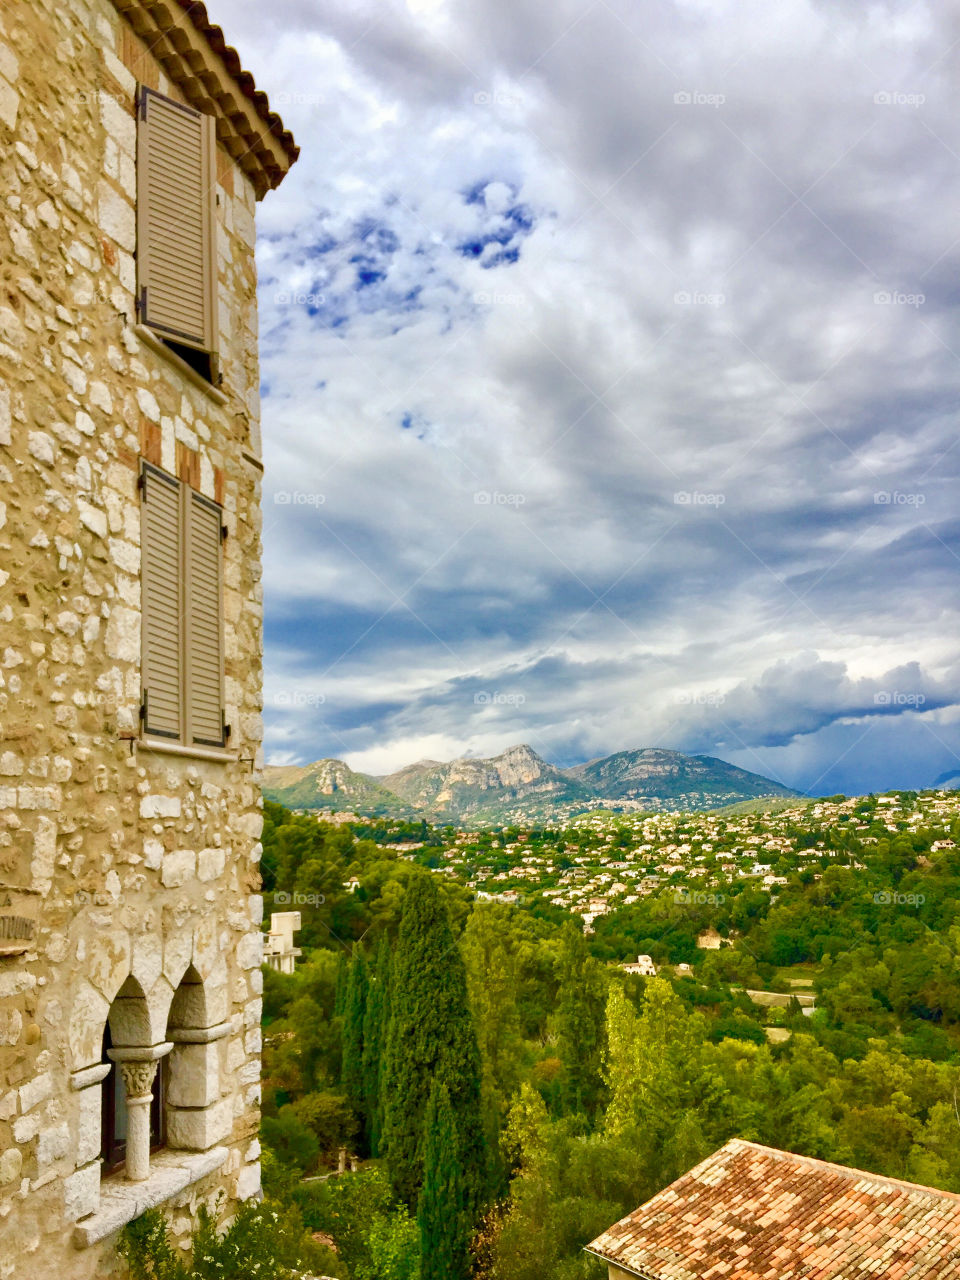 Panorama view from French hilltop village with stone walls